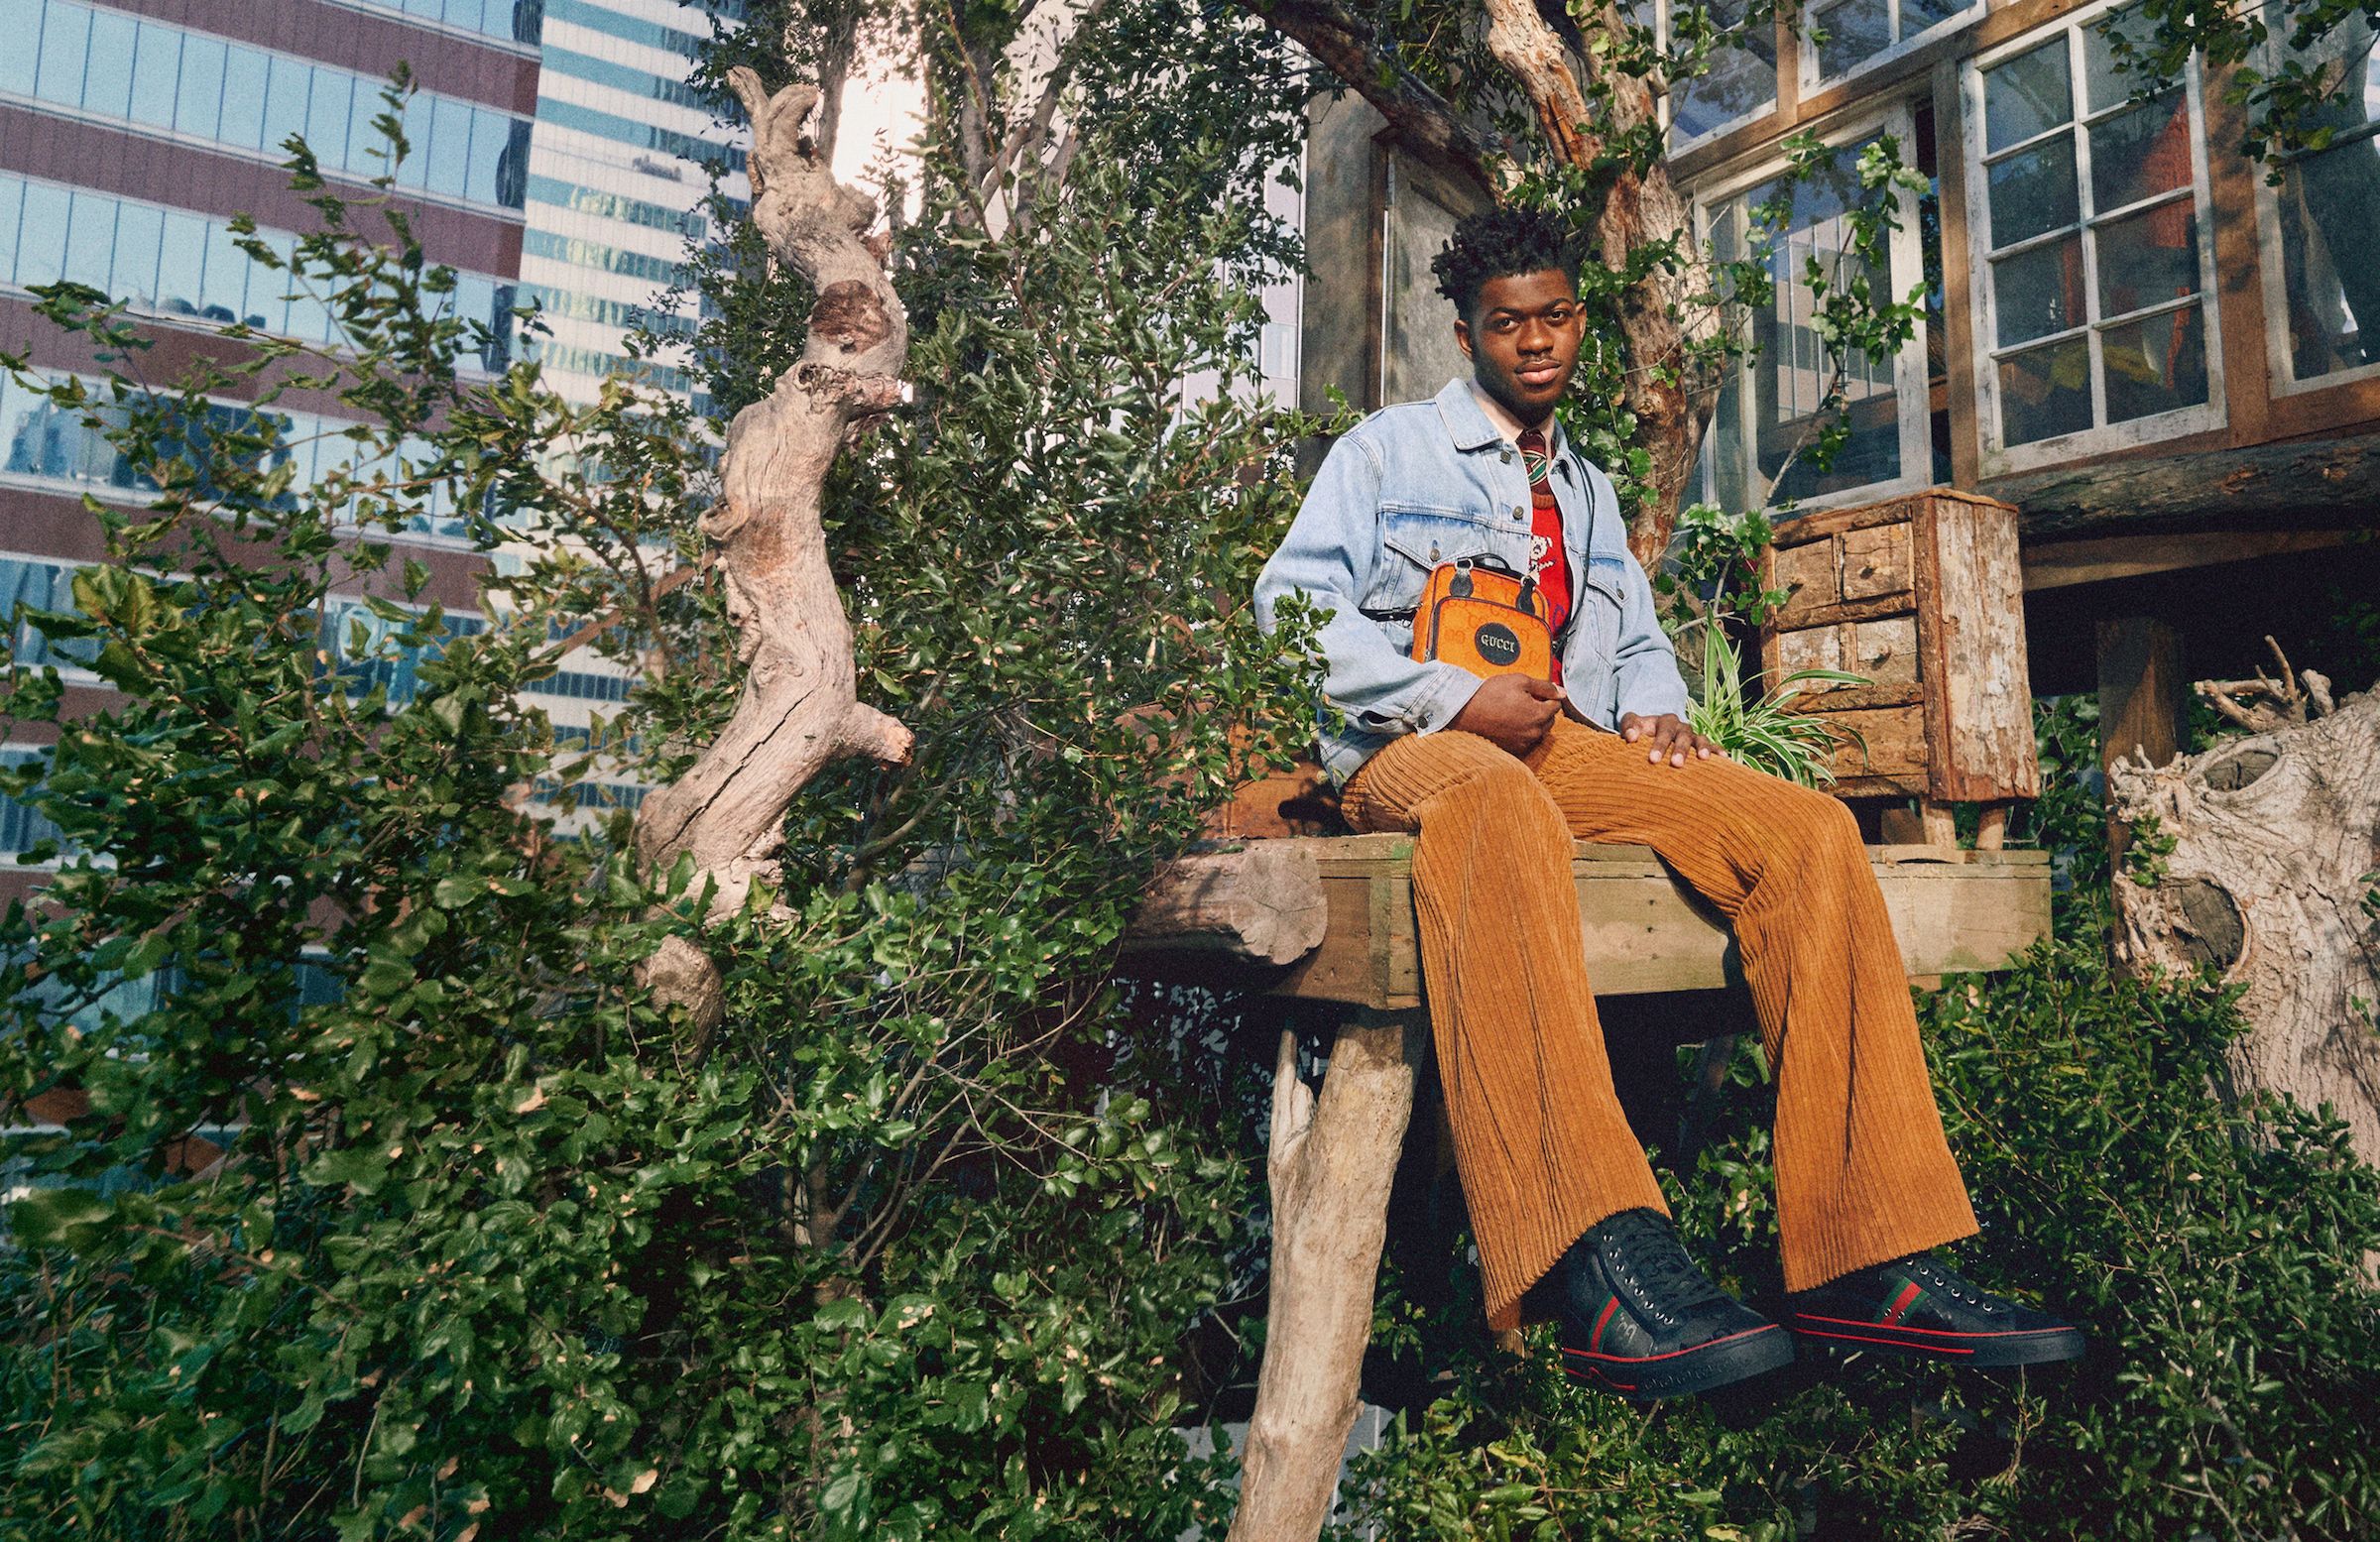 The Brands: How Gucci speeds up on eco-friendliness